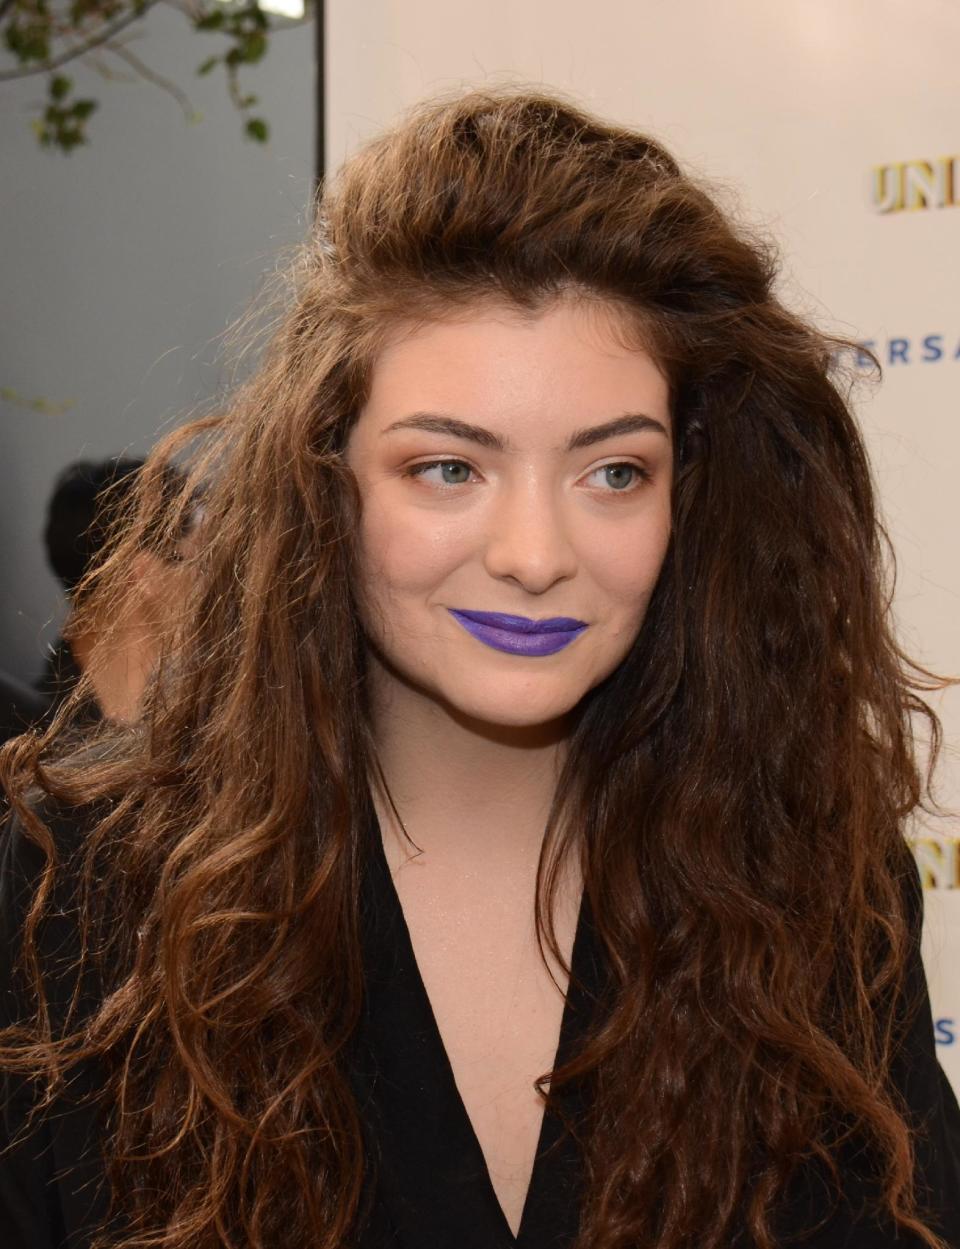 Lorde seen at Universal Music Brunch to Celebrate the 56th Annual GRAMMY Awards, on Saturday, Jan. 25, 2014, in Hollywood, Calif. (Photo by Tonya Wise/Invision/AP)